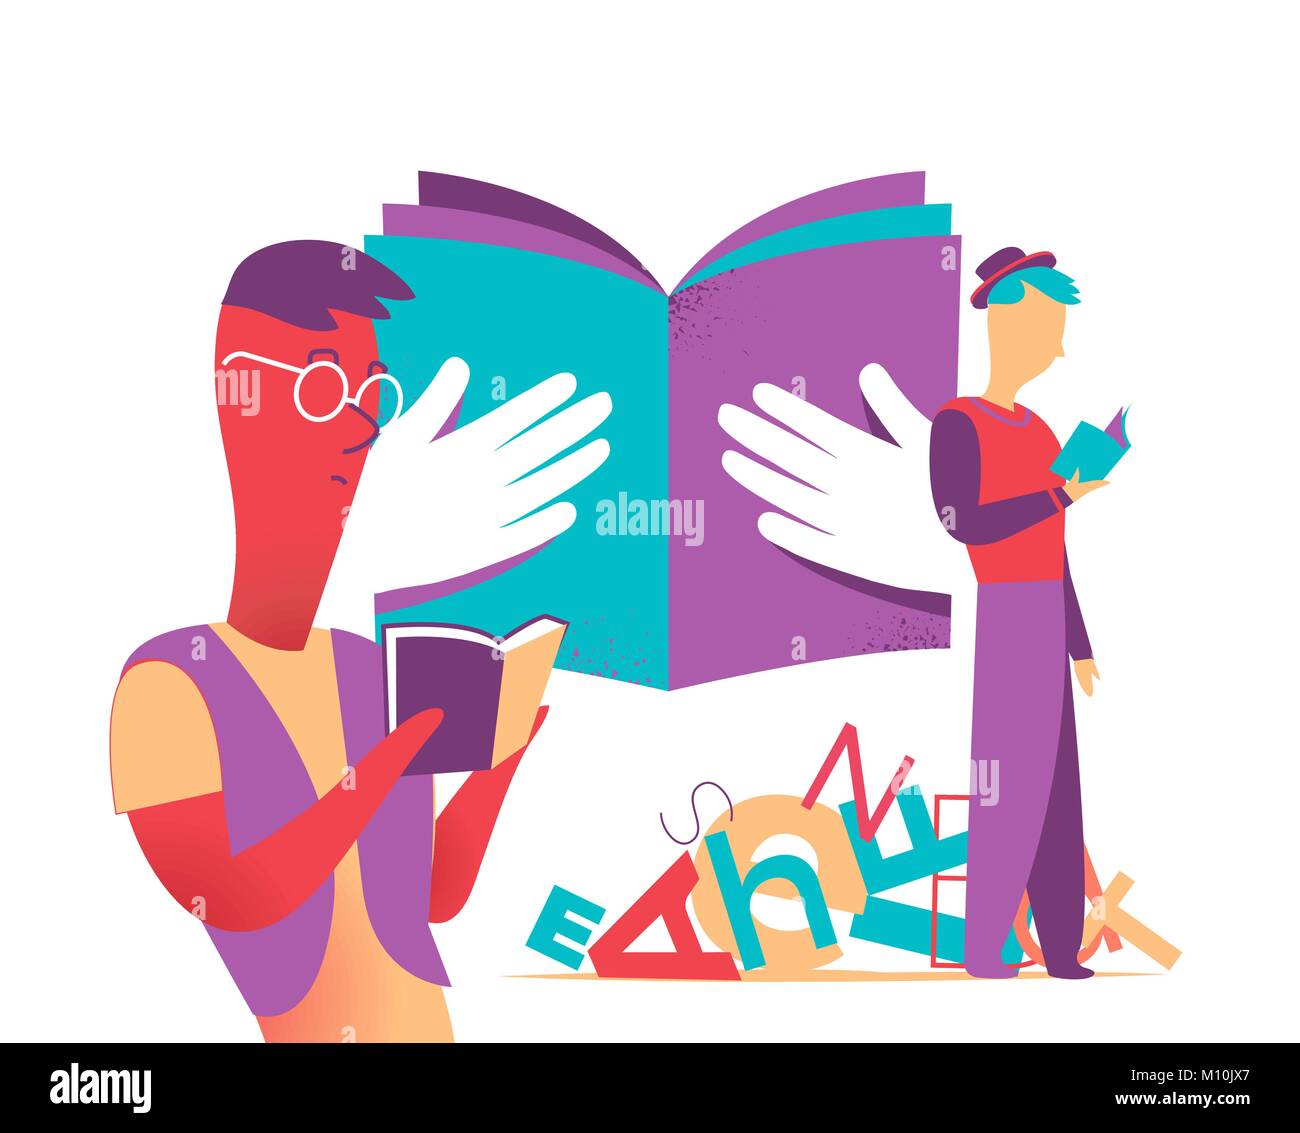 A great book save your life everyday Stock Vector